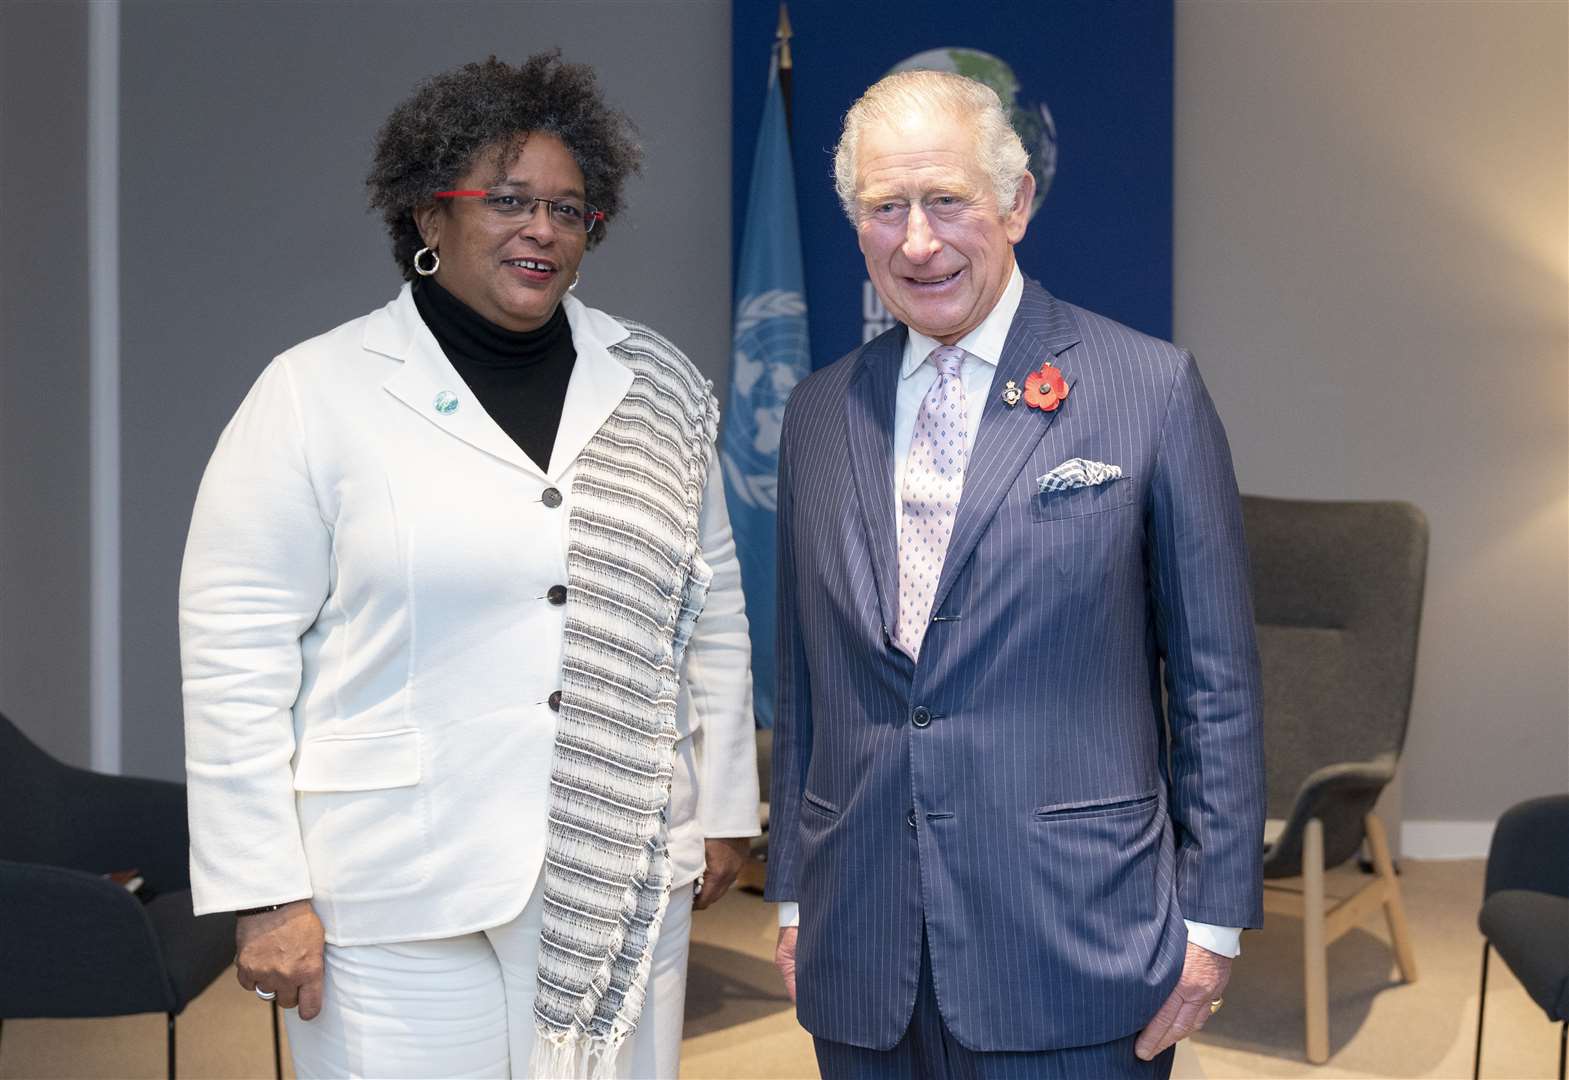 The Prince of Wales with the prime minister of Barbados Mia Mottley (Jane Barlow/PA)